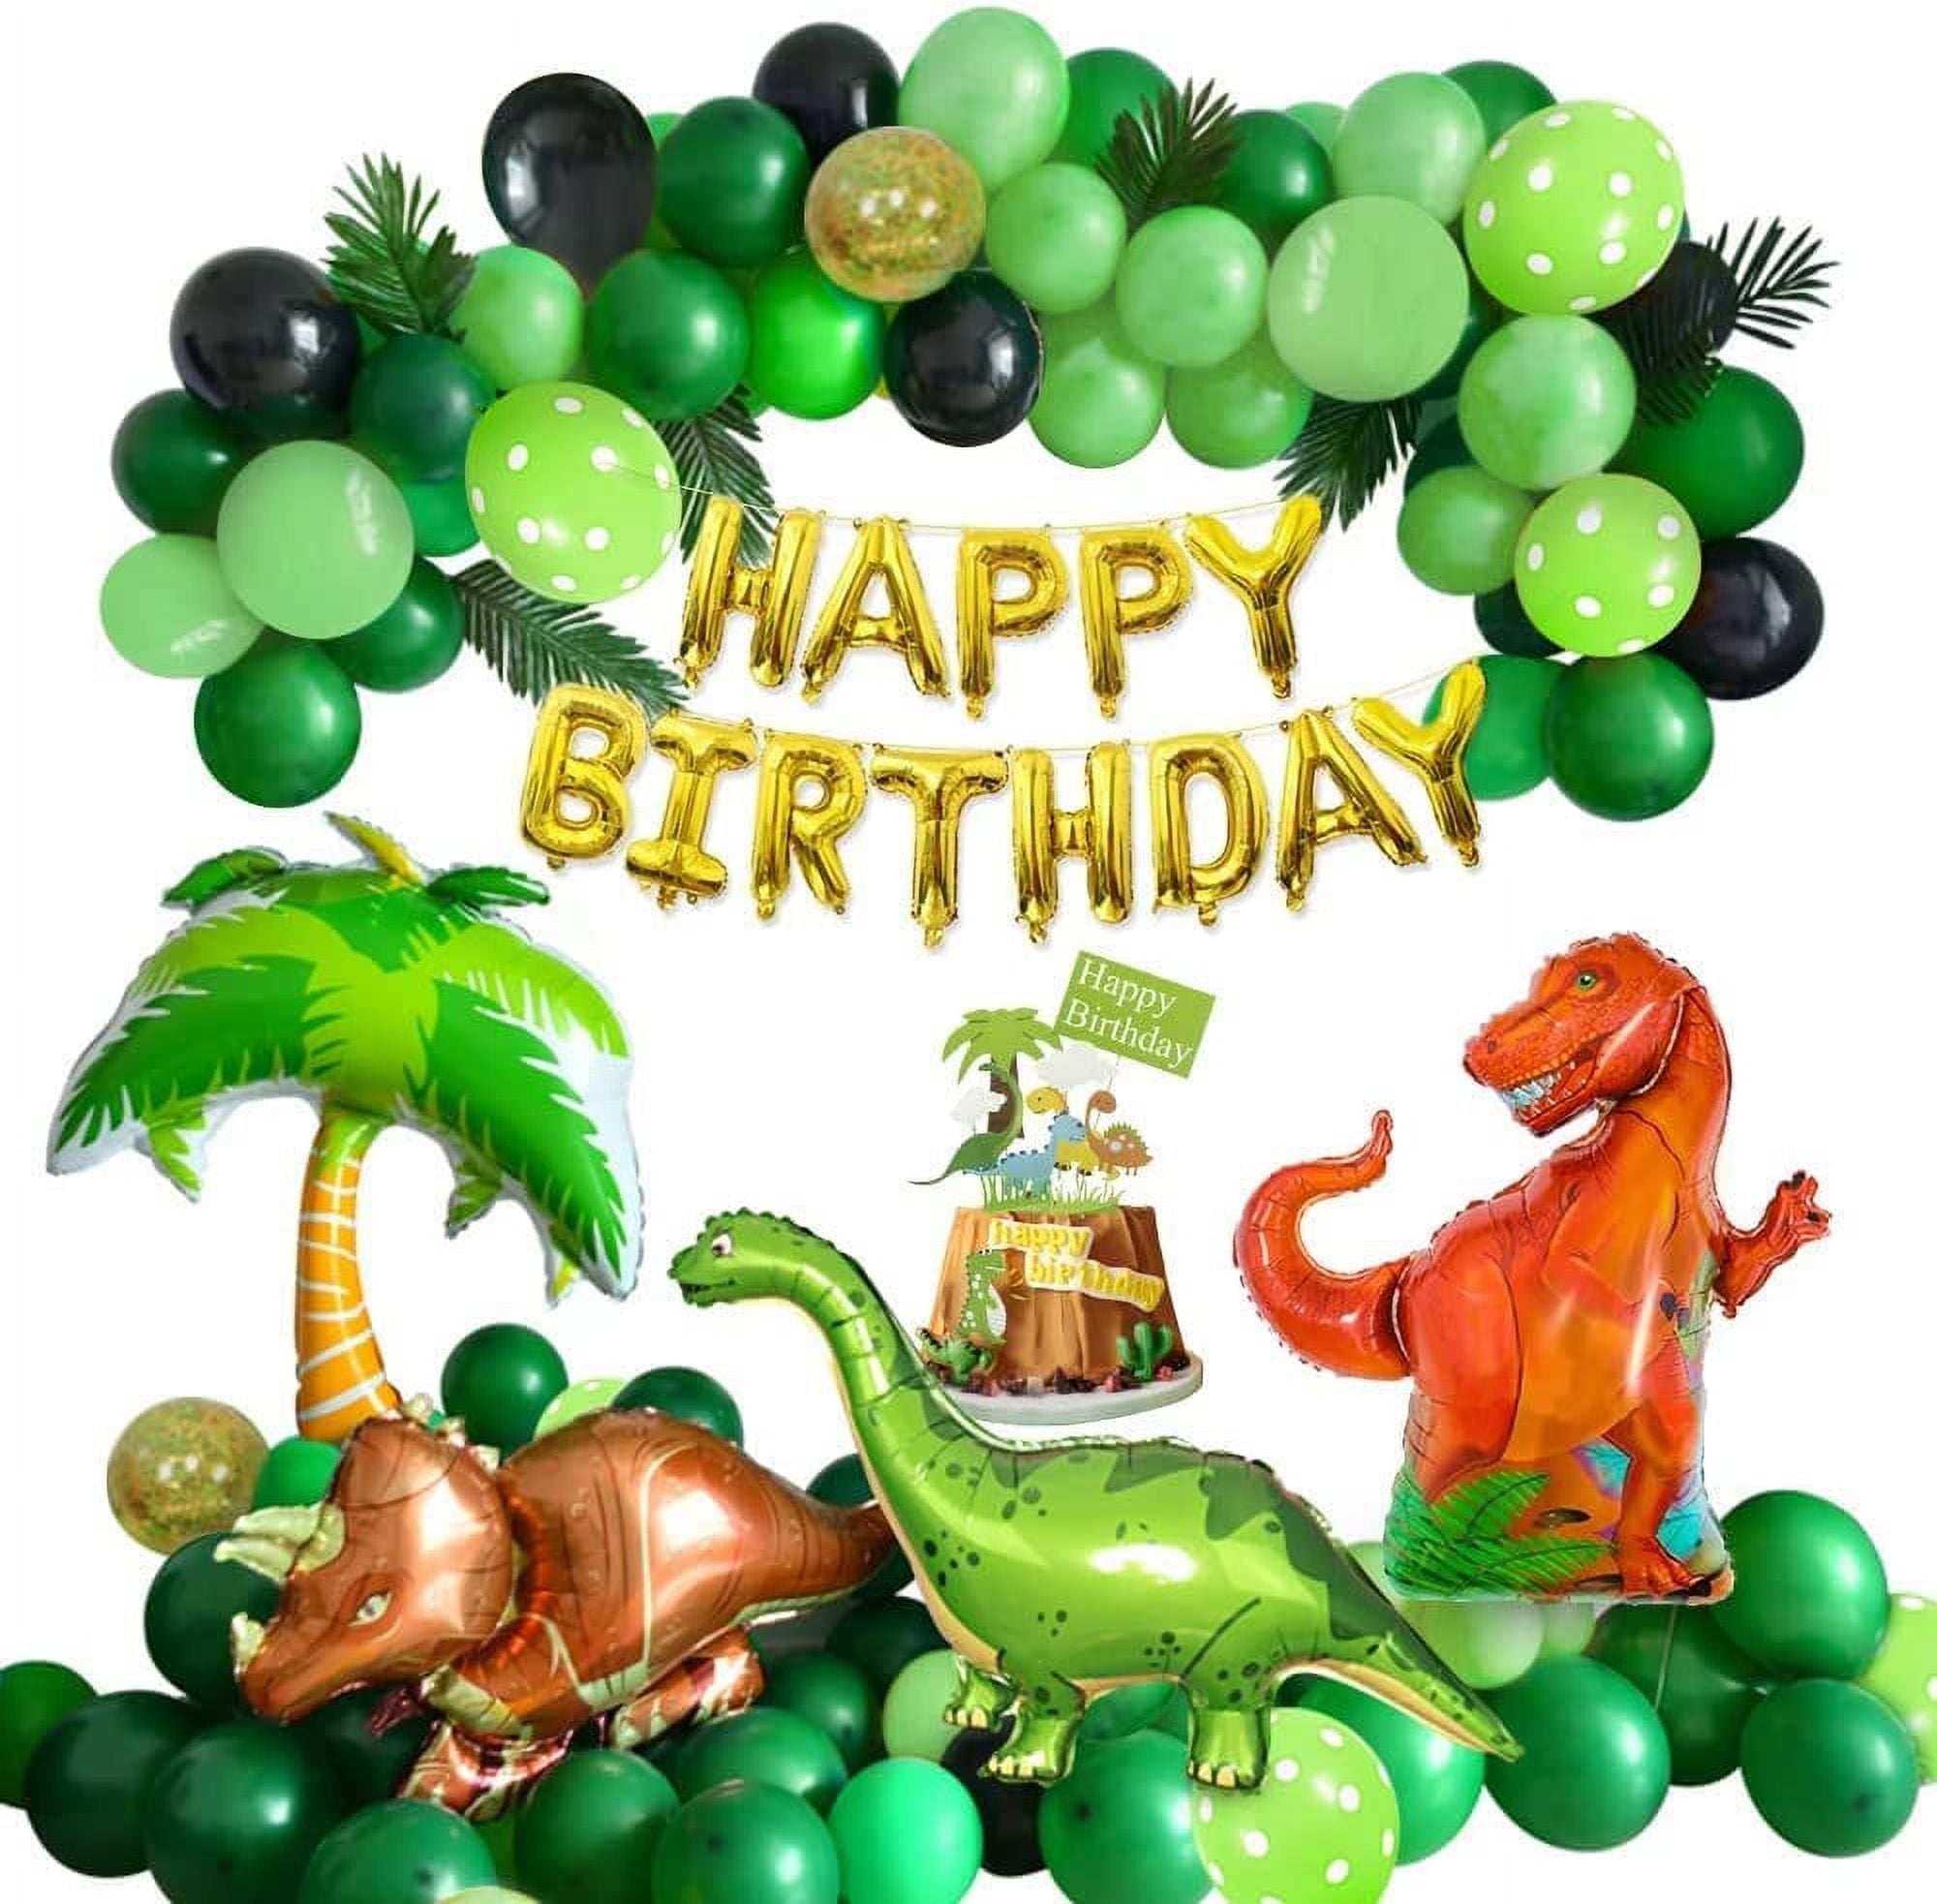 AOWEE Dinosaur Birthday Party Supplies, Dinosaur Theme Green Balloon Arch  Decorations with 3pcs 3D Dinosaur Foil Balloons for Boy 1st 2nd 3rd Birthday  Baby Shower Jurassic Party 